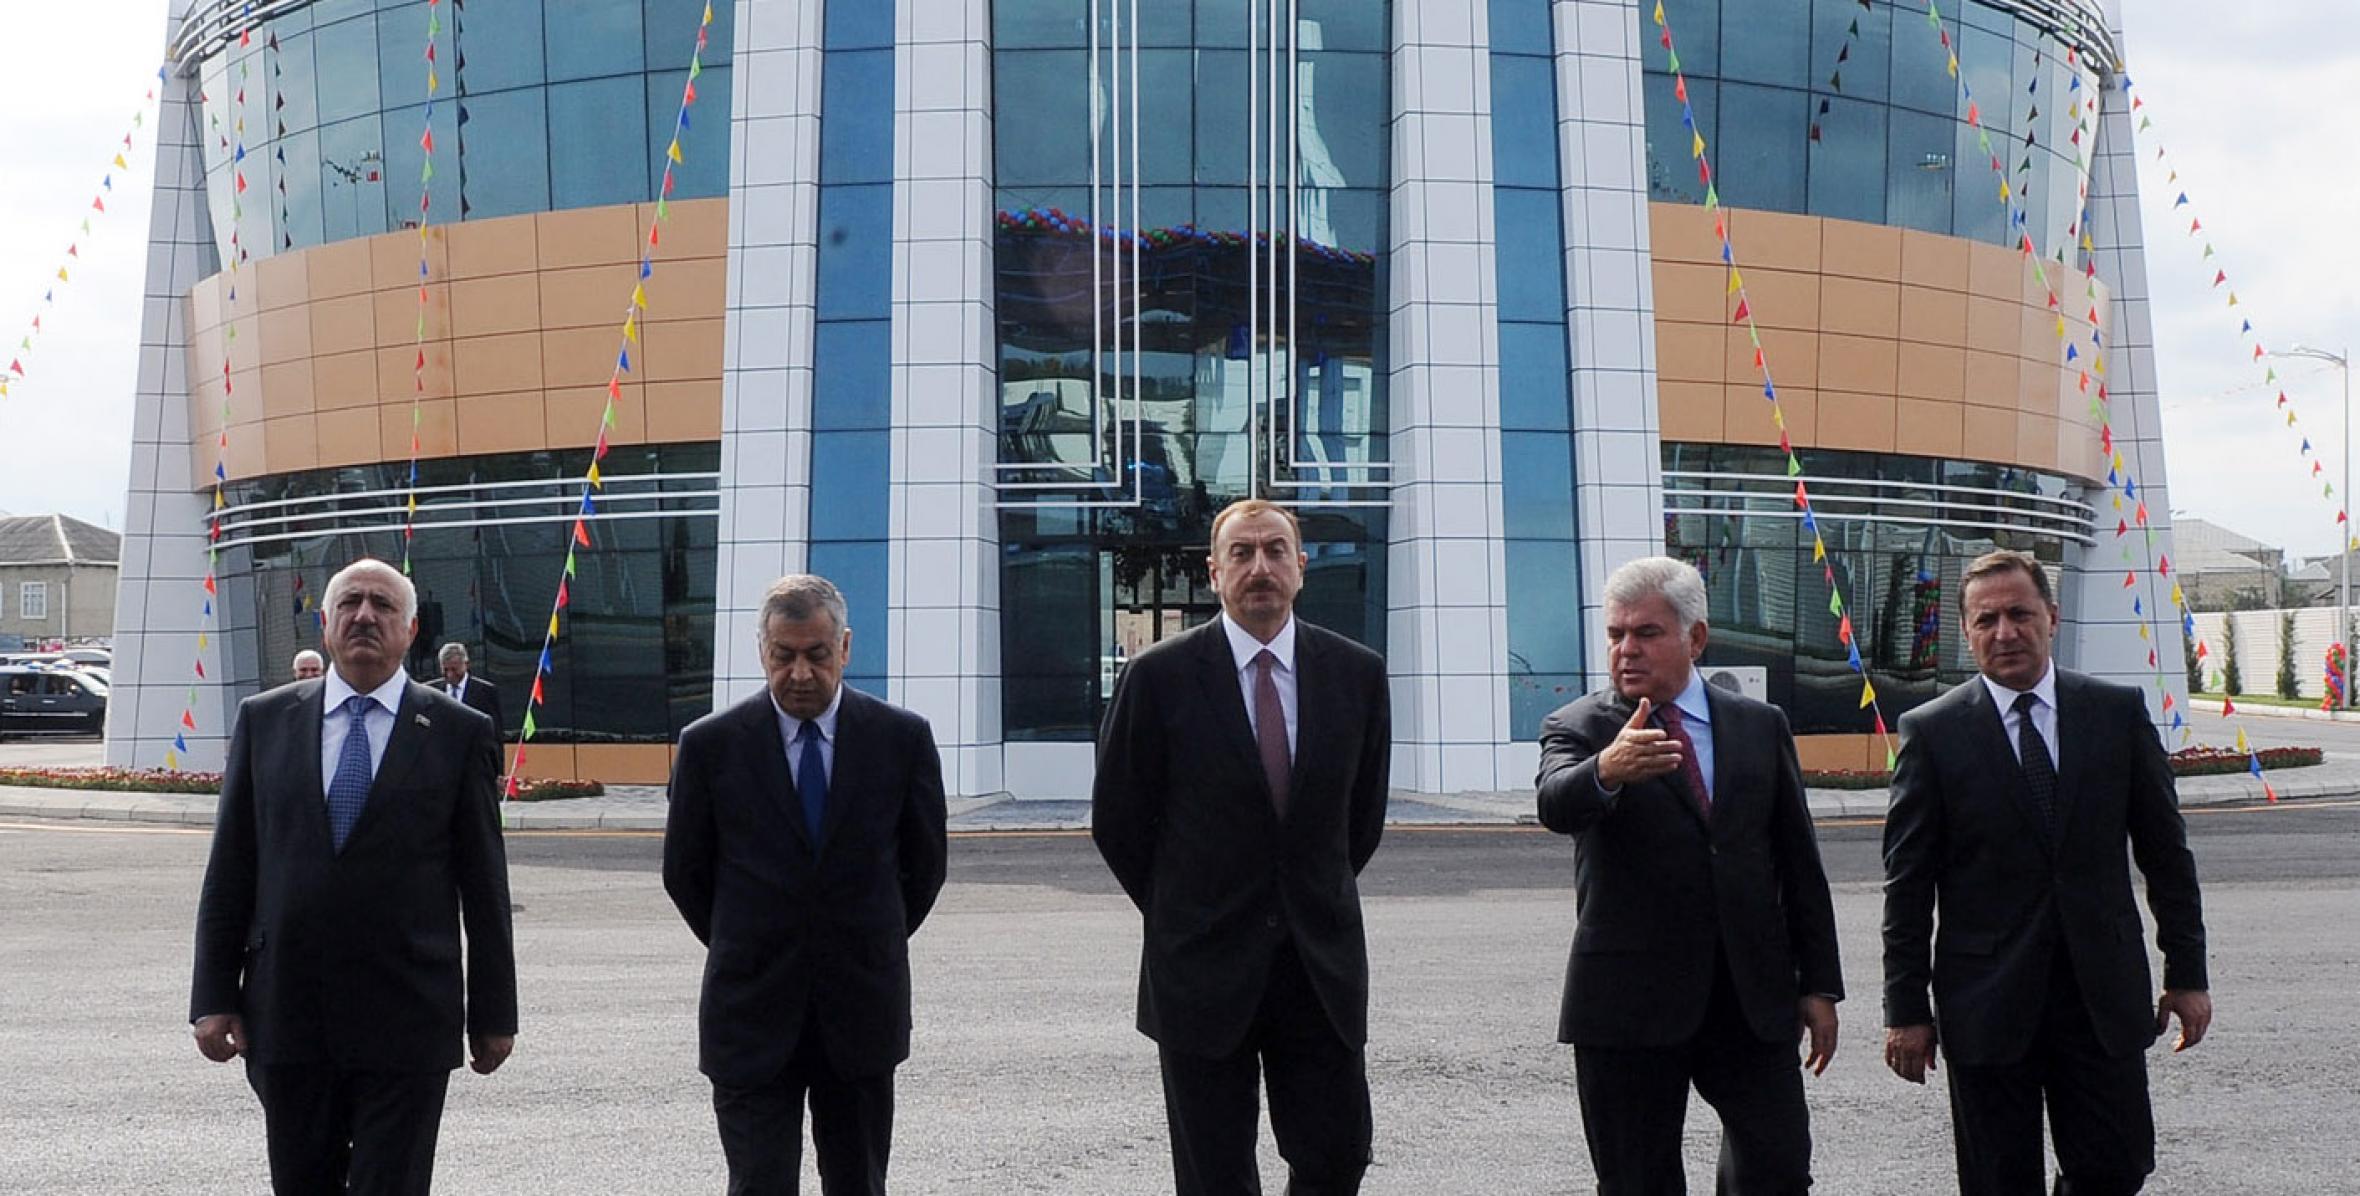 Ilham Aliyev attended the opening of the Guba bus station